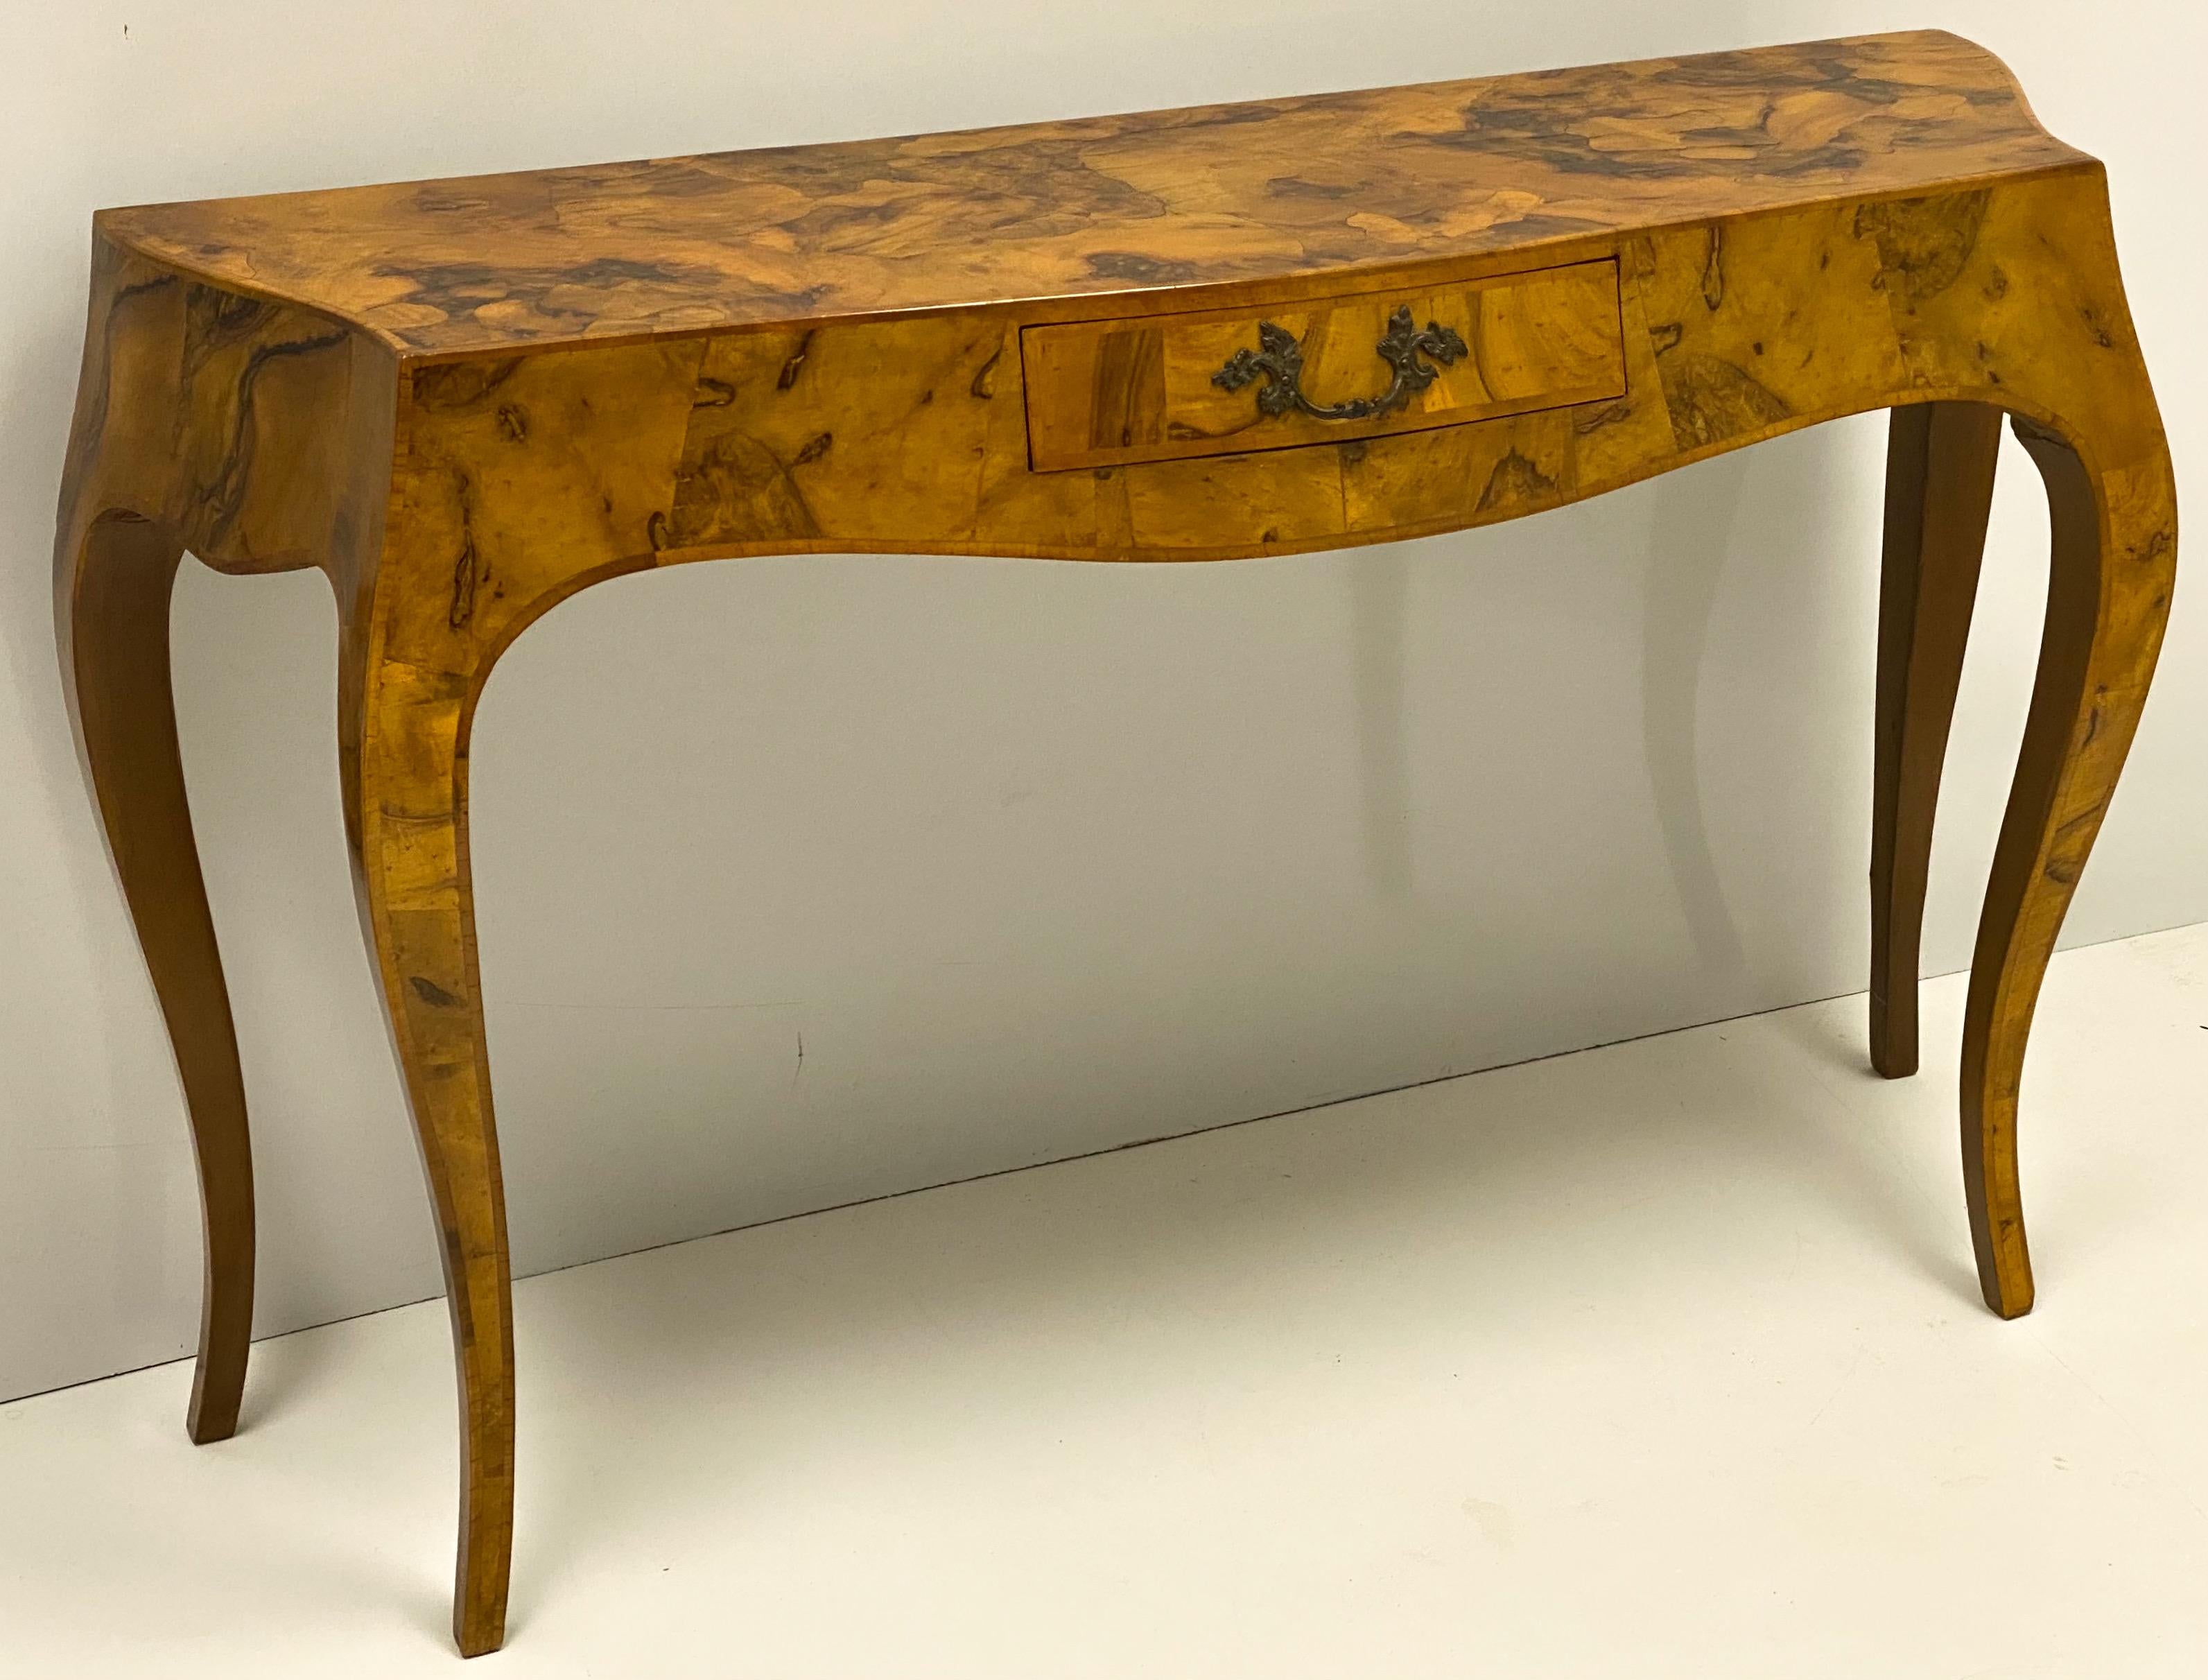 This is an Italian patchwork burl serpentine console table. It has a small, paper lined single drawer with original brass hardware. It is unmarked and in very good condition. The top surface measures:
50” L x 15” W.